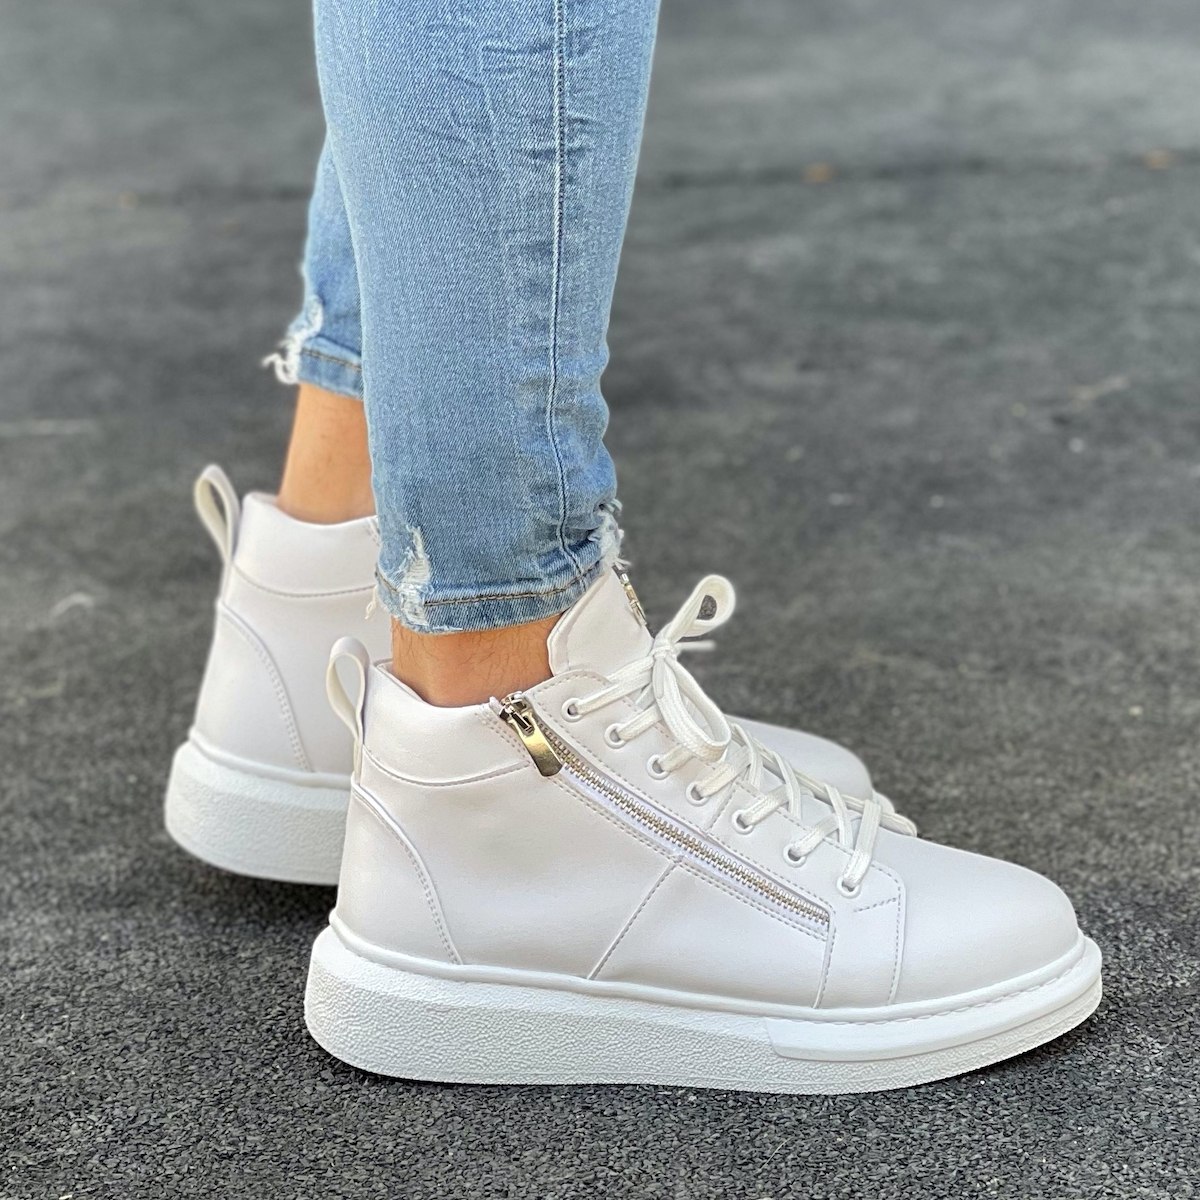 Hype Sole Zipped Style High Top Sneakers in Full White